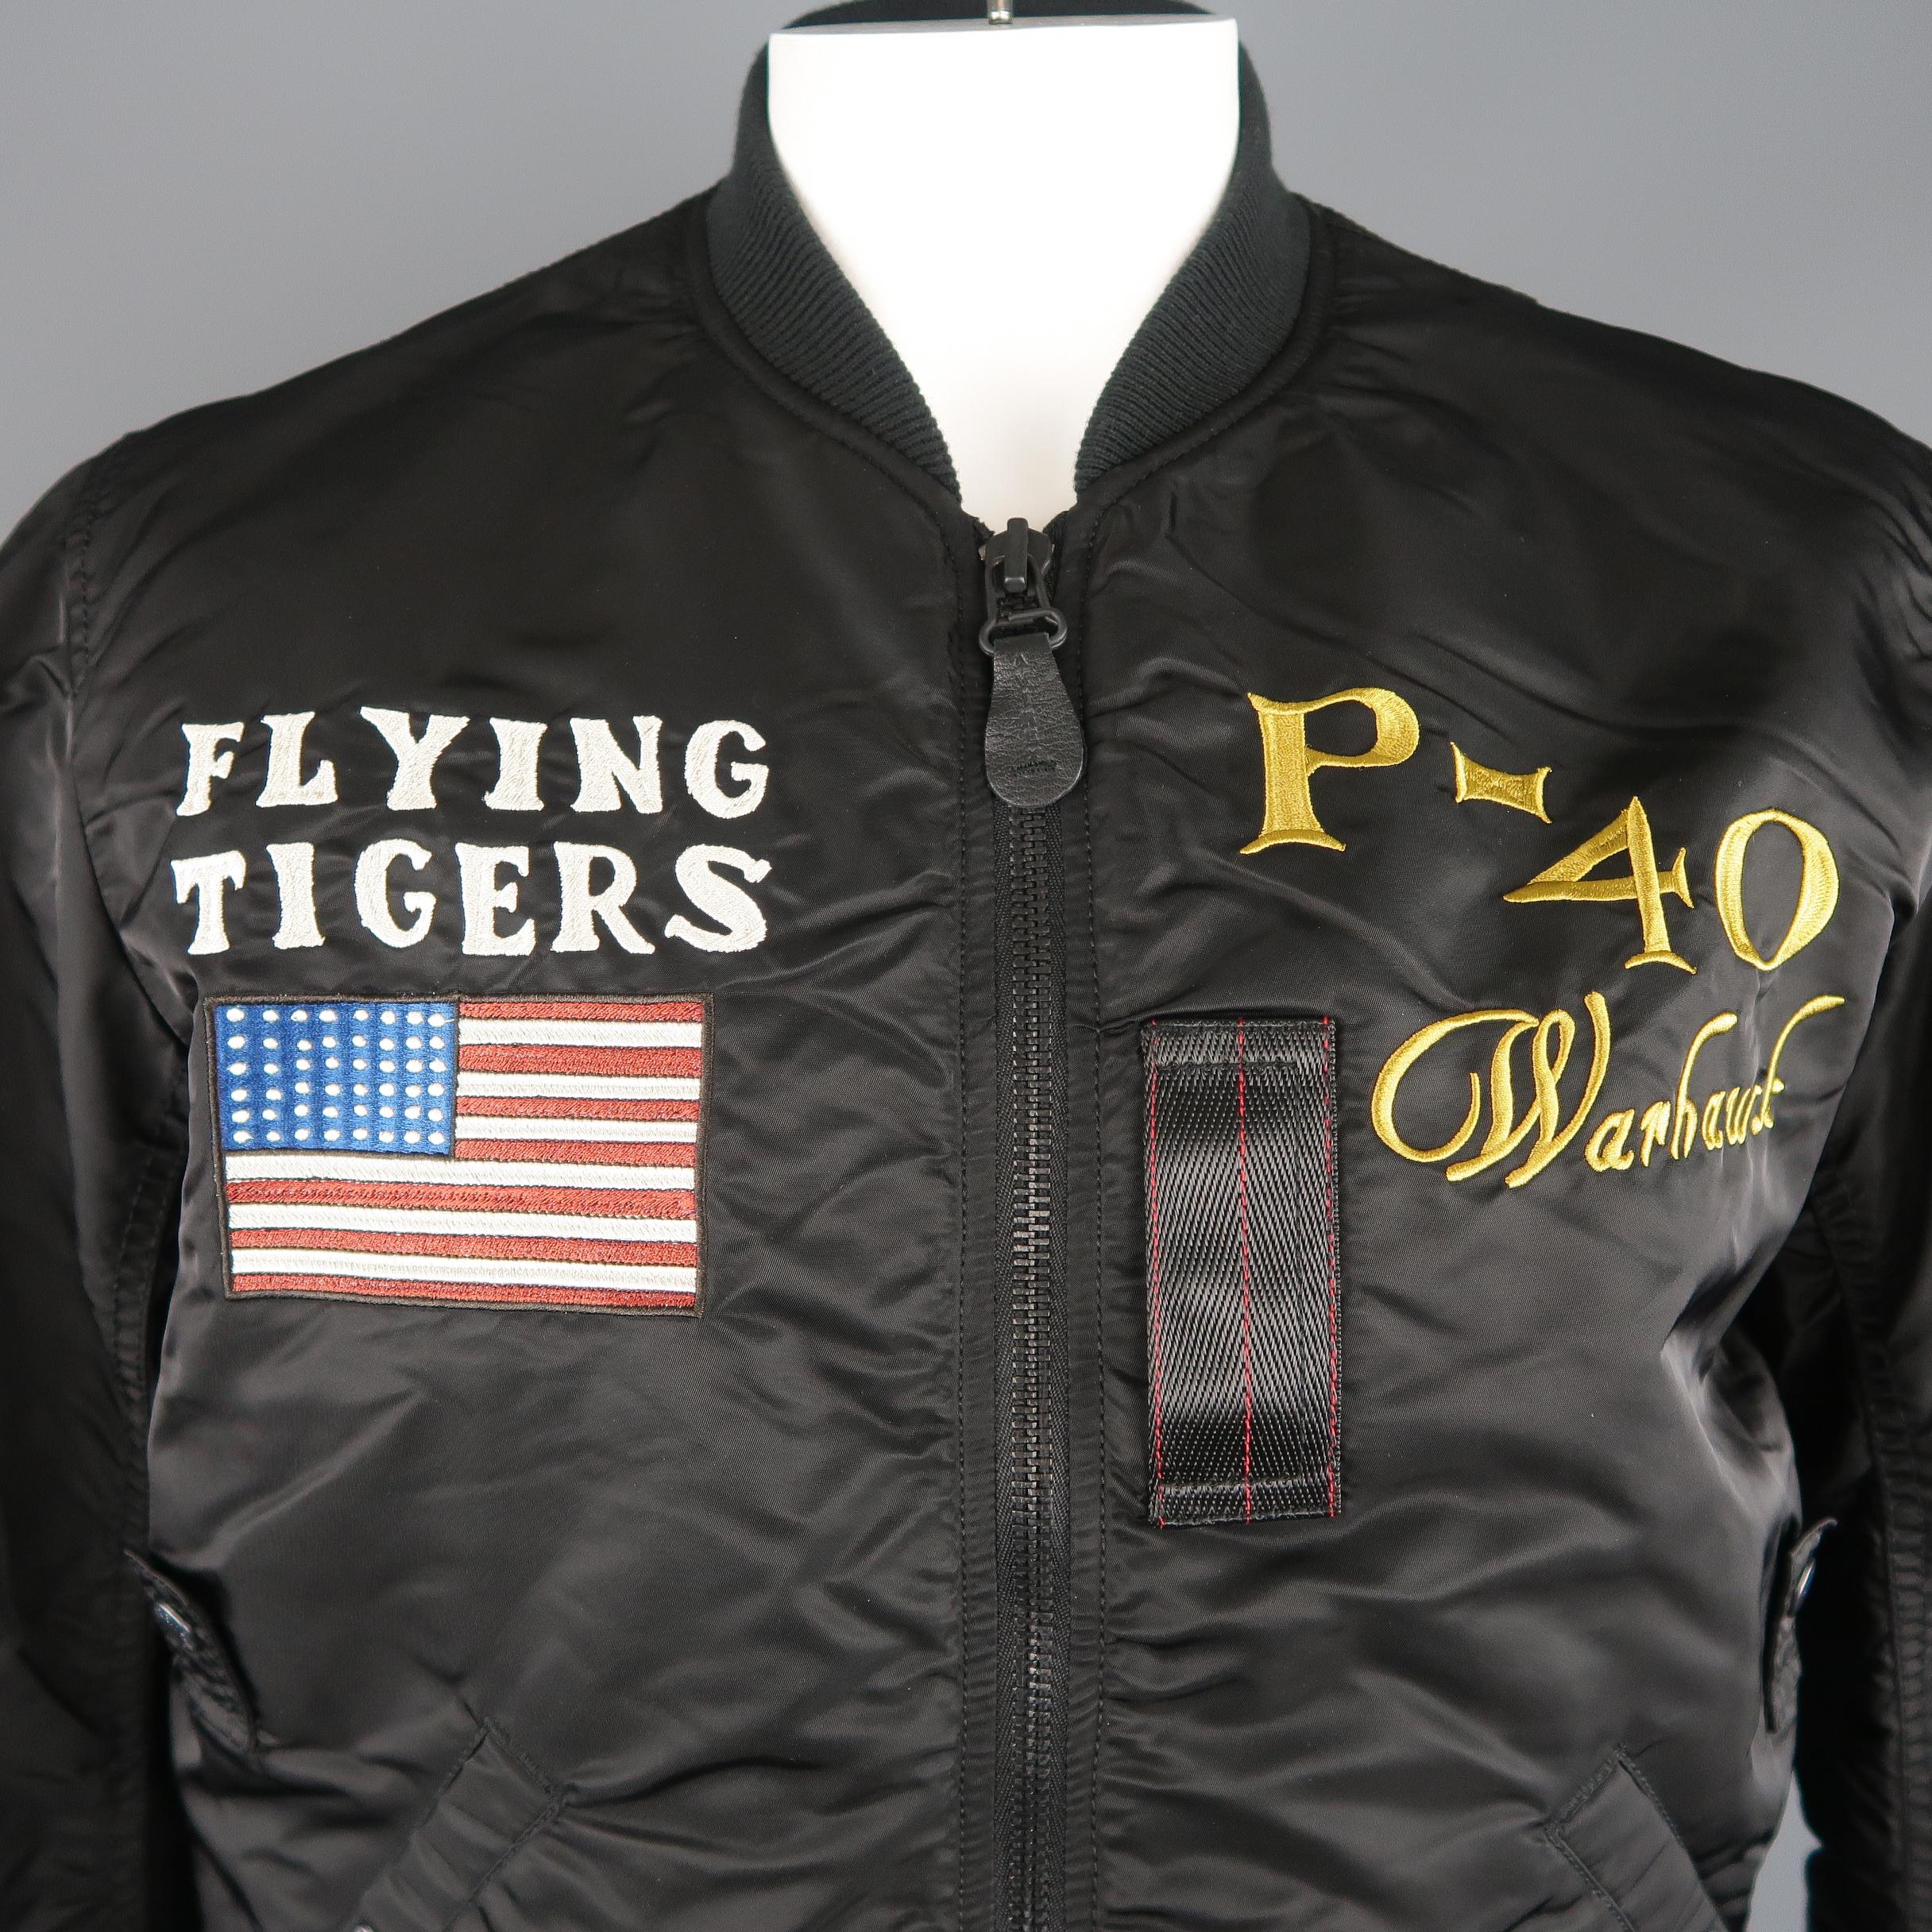 AVIREX flight bomber jacket comes in black nylon with a baseball collar, zip front, slanted pockets, arm pocket, tab details, and 'Flying Tigers' embroidery and patchwork.
 
Excellent Pre-Owned Condition.
Marked: XL
 
Measurements:
 
Shoulder: 19